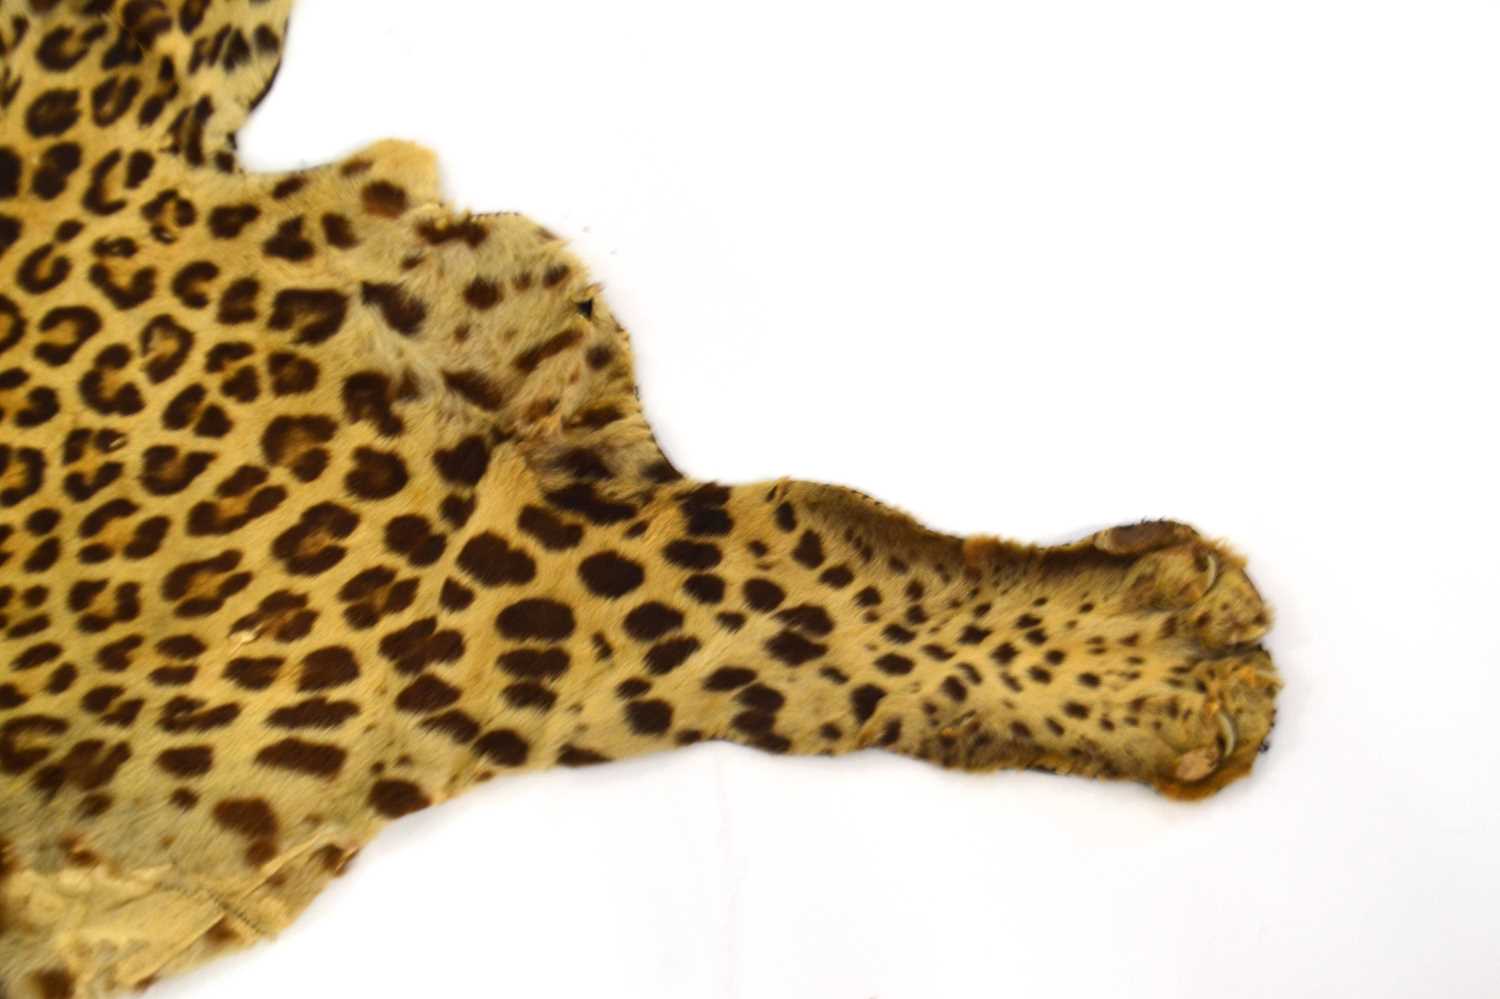 20th Century taxidermy leopard skin rug and mount, open gaping mouth head with glass eyes, by - Image 7 of 11